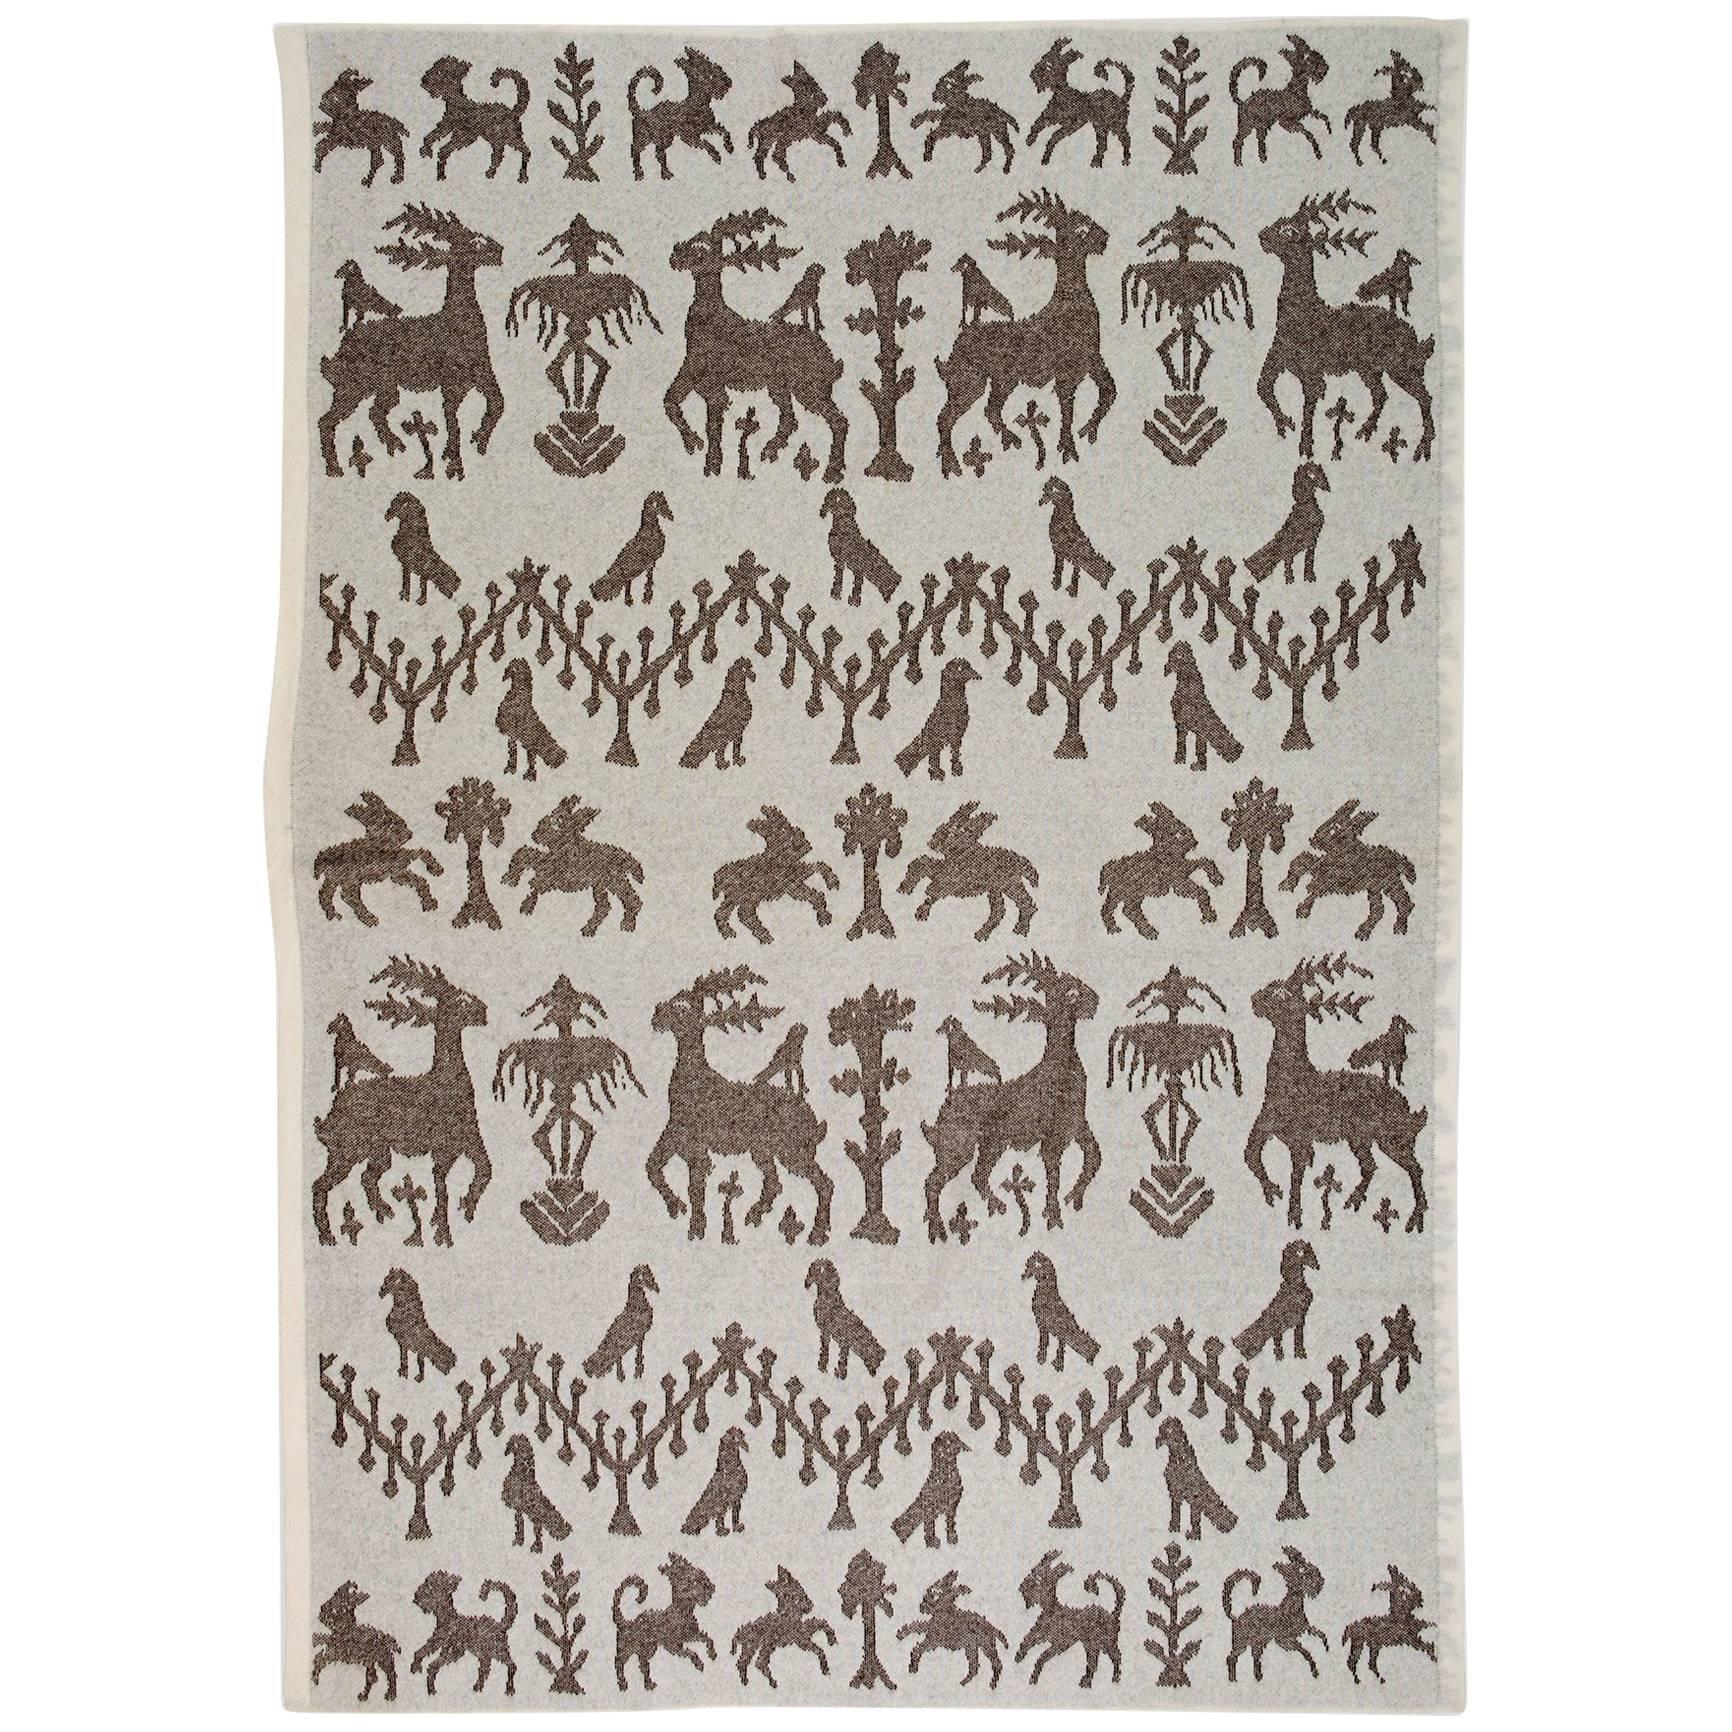 Folklore Blanket by Saved, New York